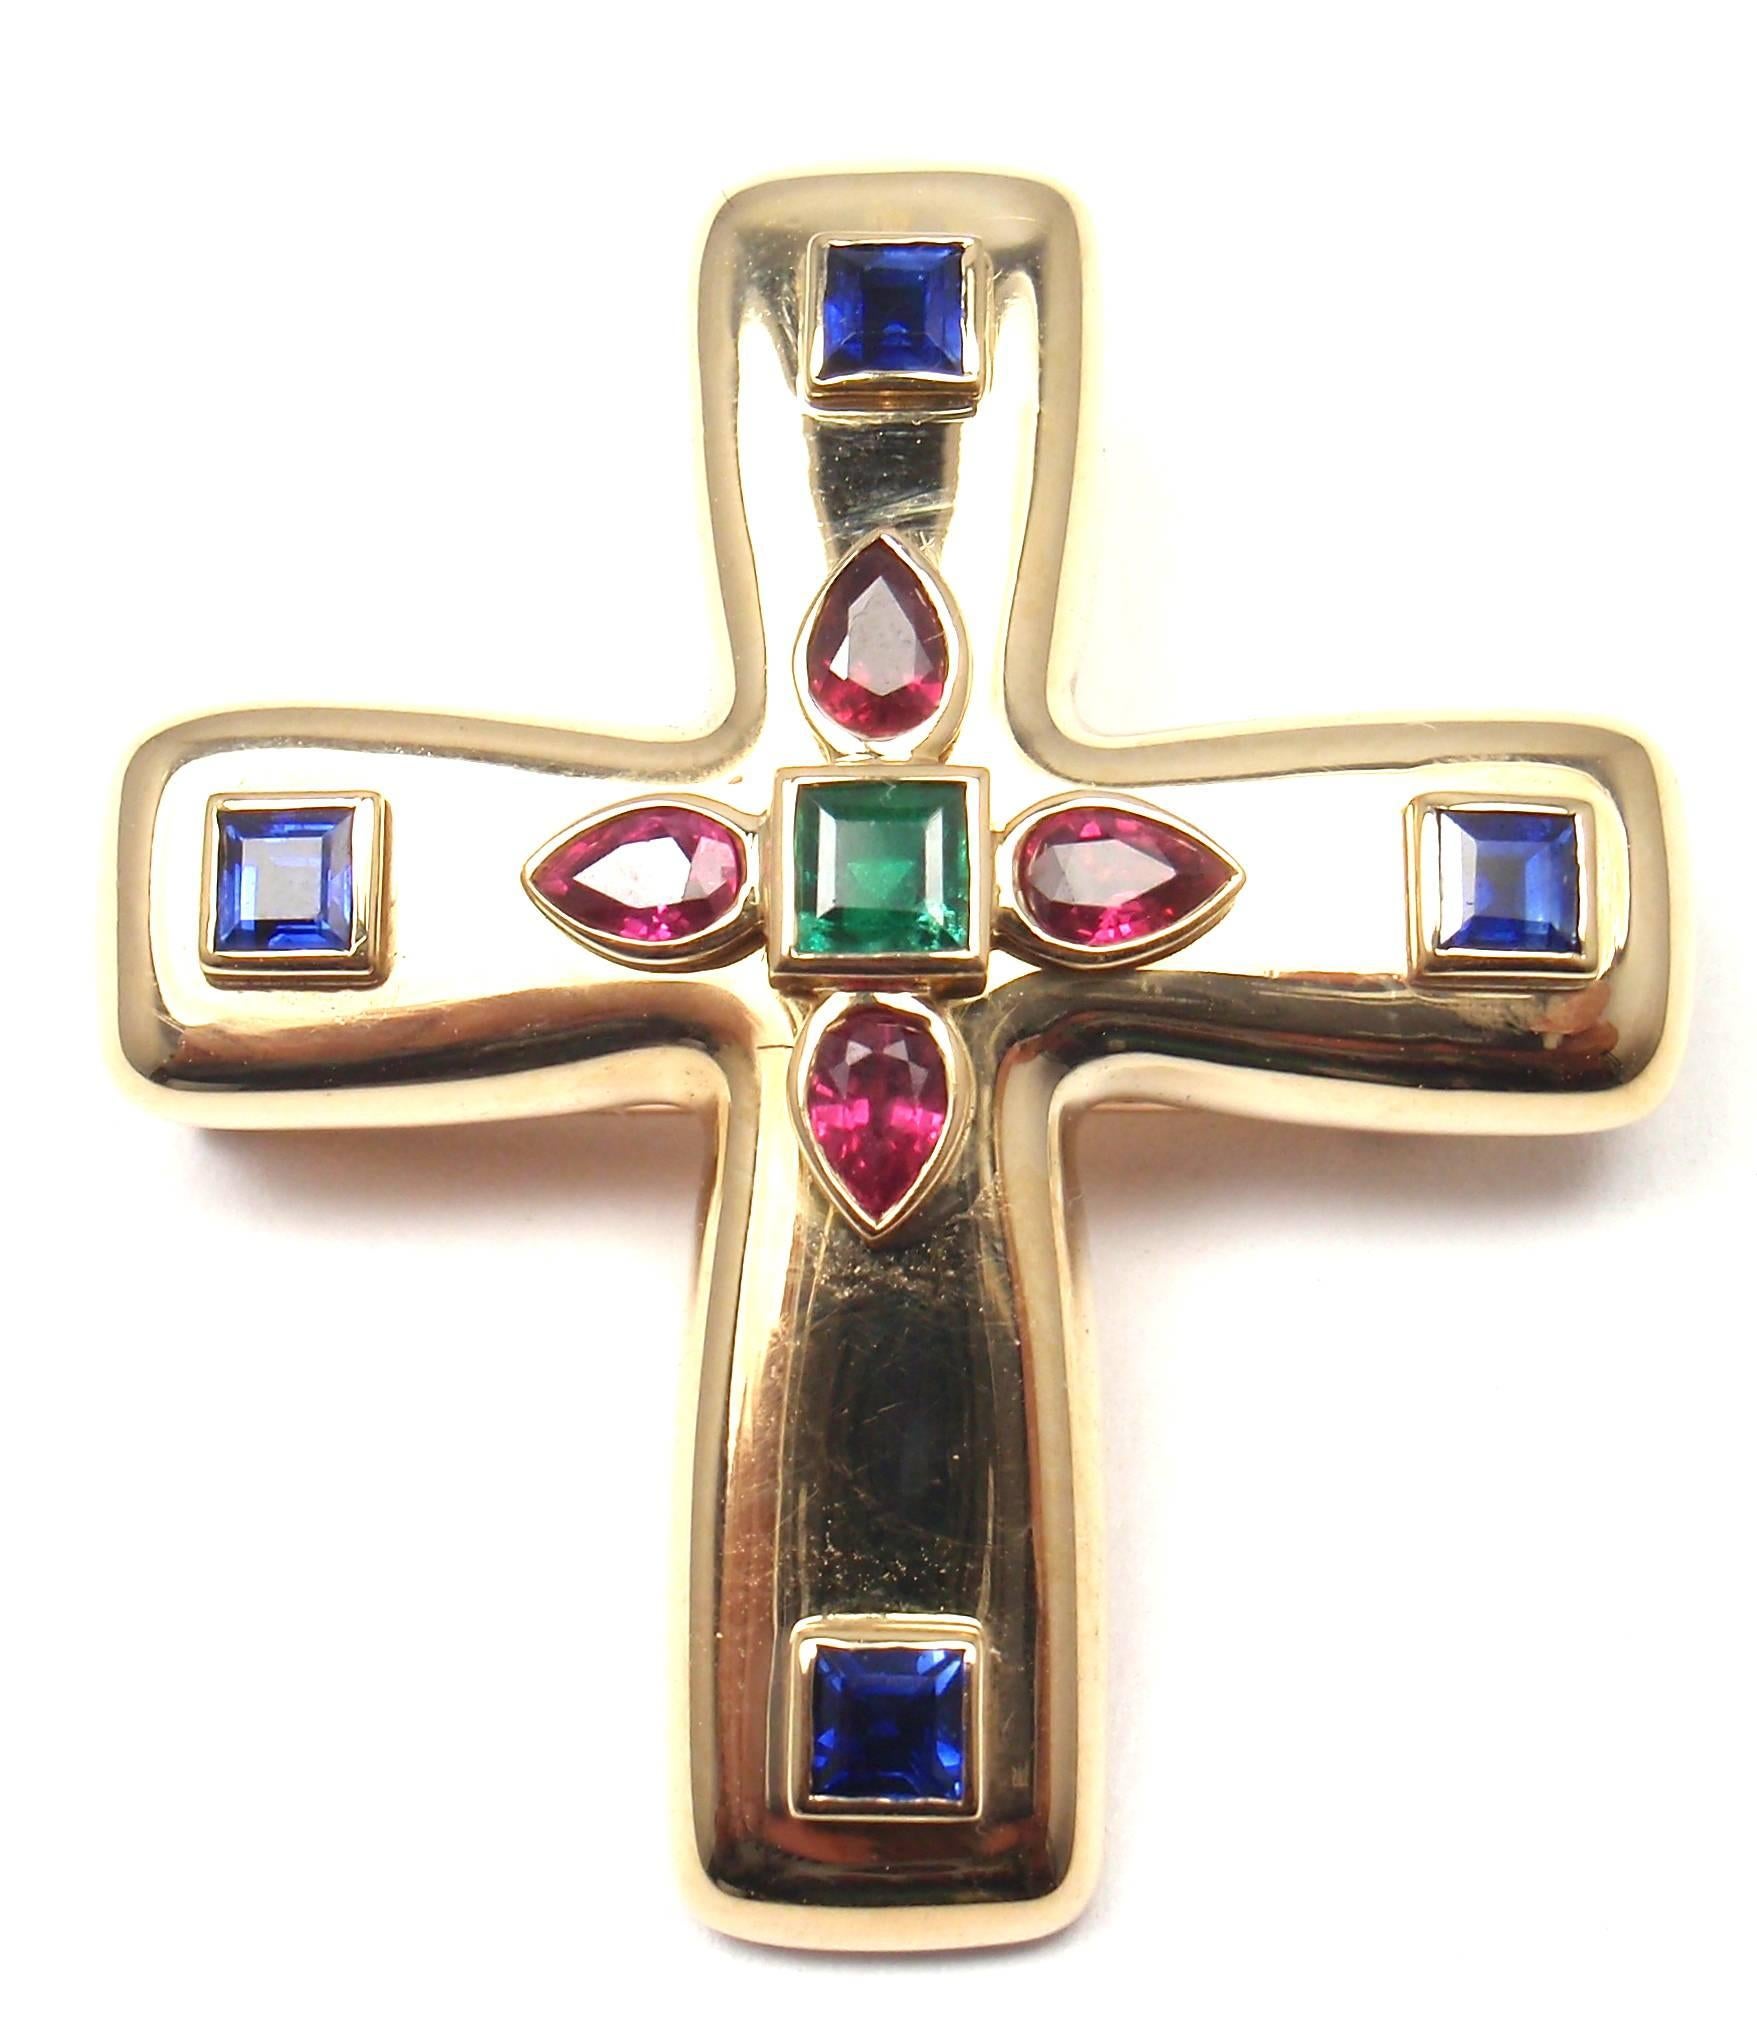 18k Yellow Gold Vizantija Cross Sapphire, Ruby and Emerald Pendant Brooch by Cartier. 

With 4 Princess Cut Sapphires, 4 Pear Shape Rubies,
1 Emerald

Details: 
Measurements:	1.5